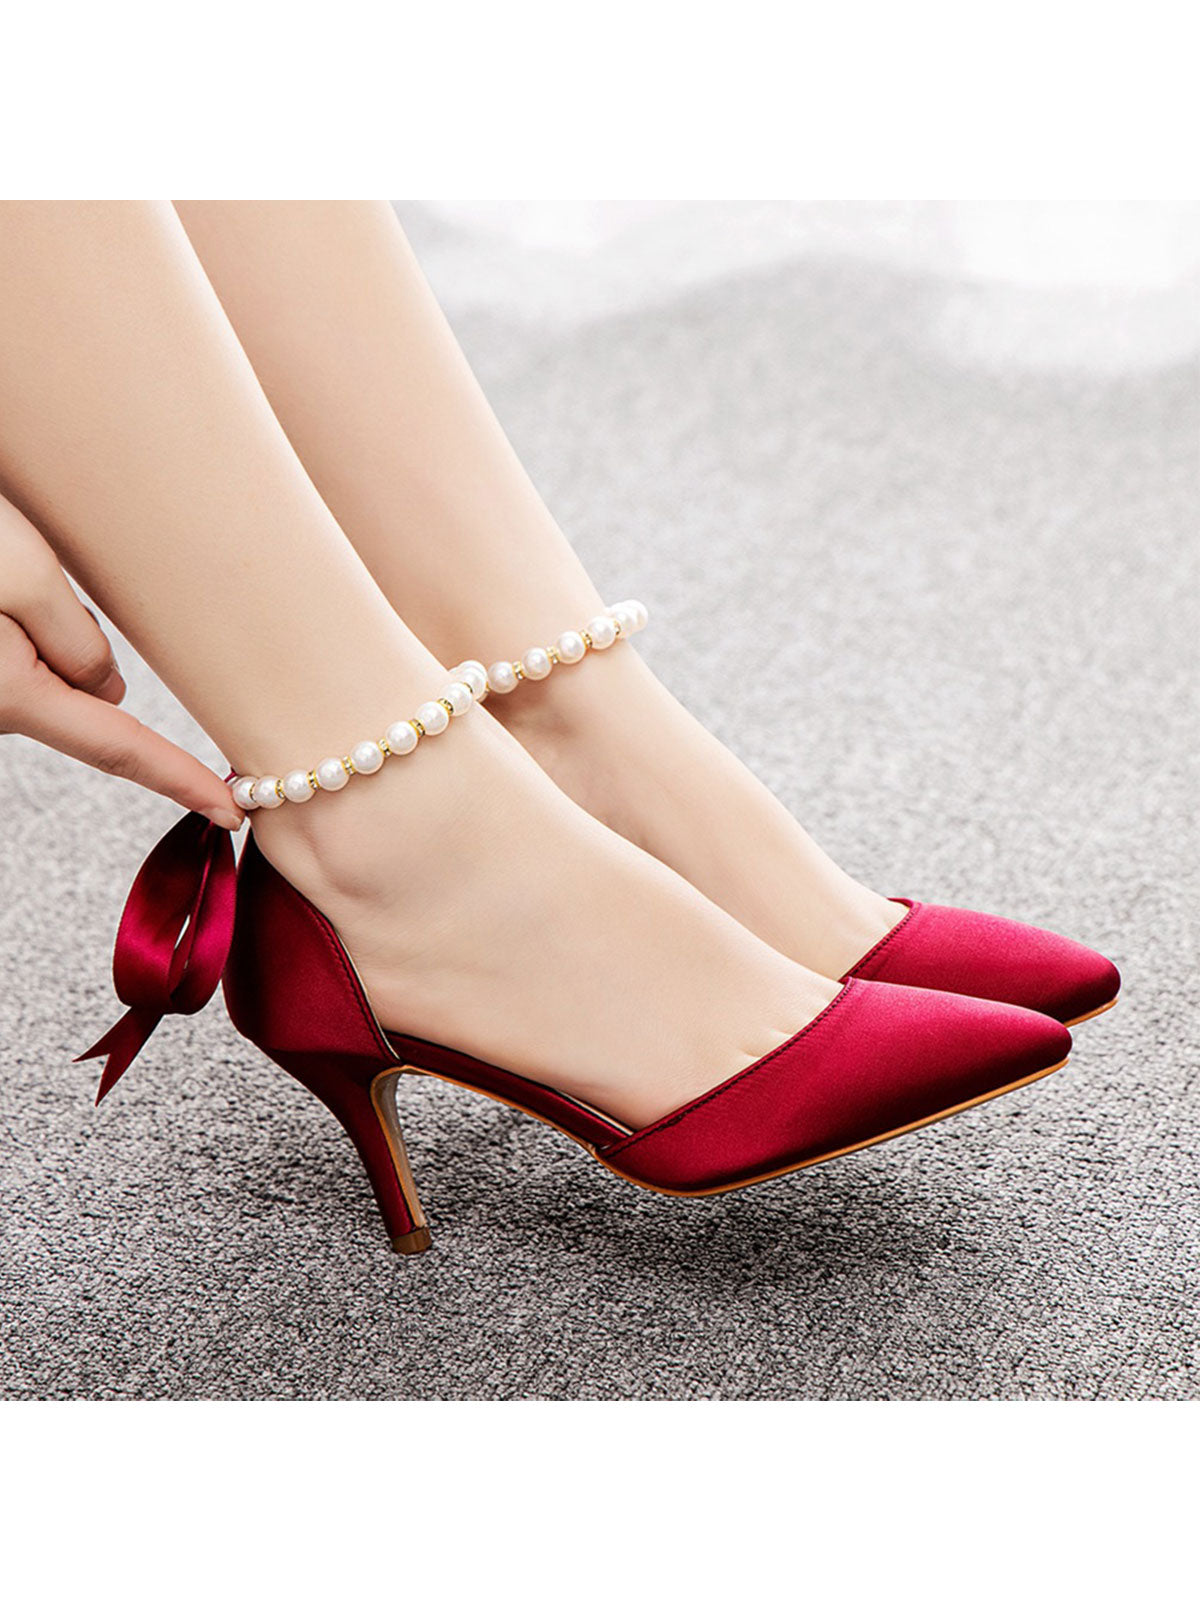 Satin Pearl Ribbon Tie Pointed Toe Ankle Strap High Heels